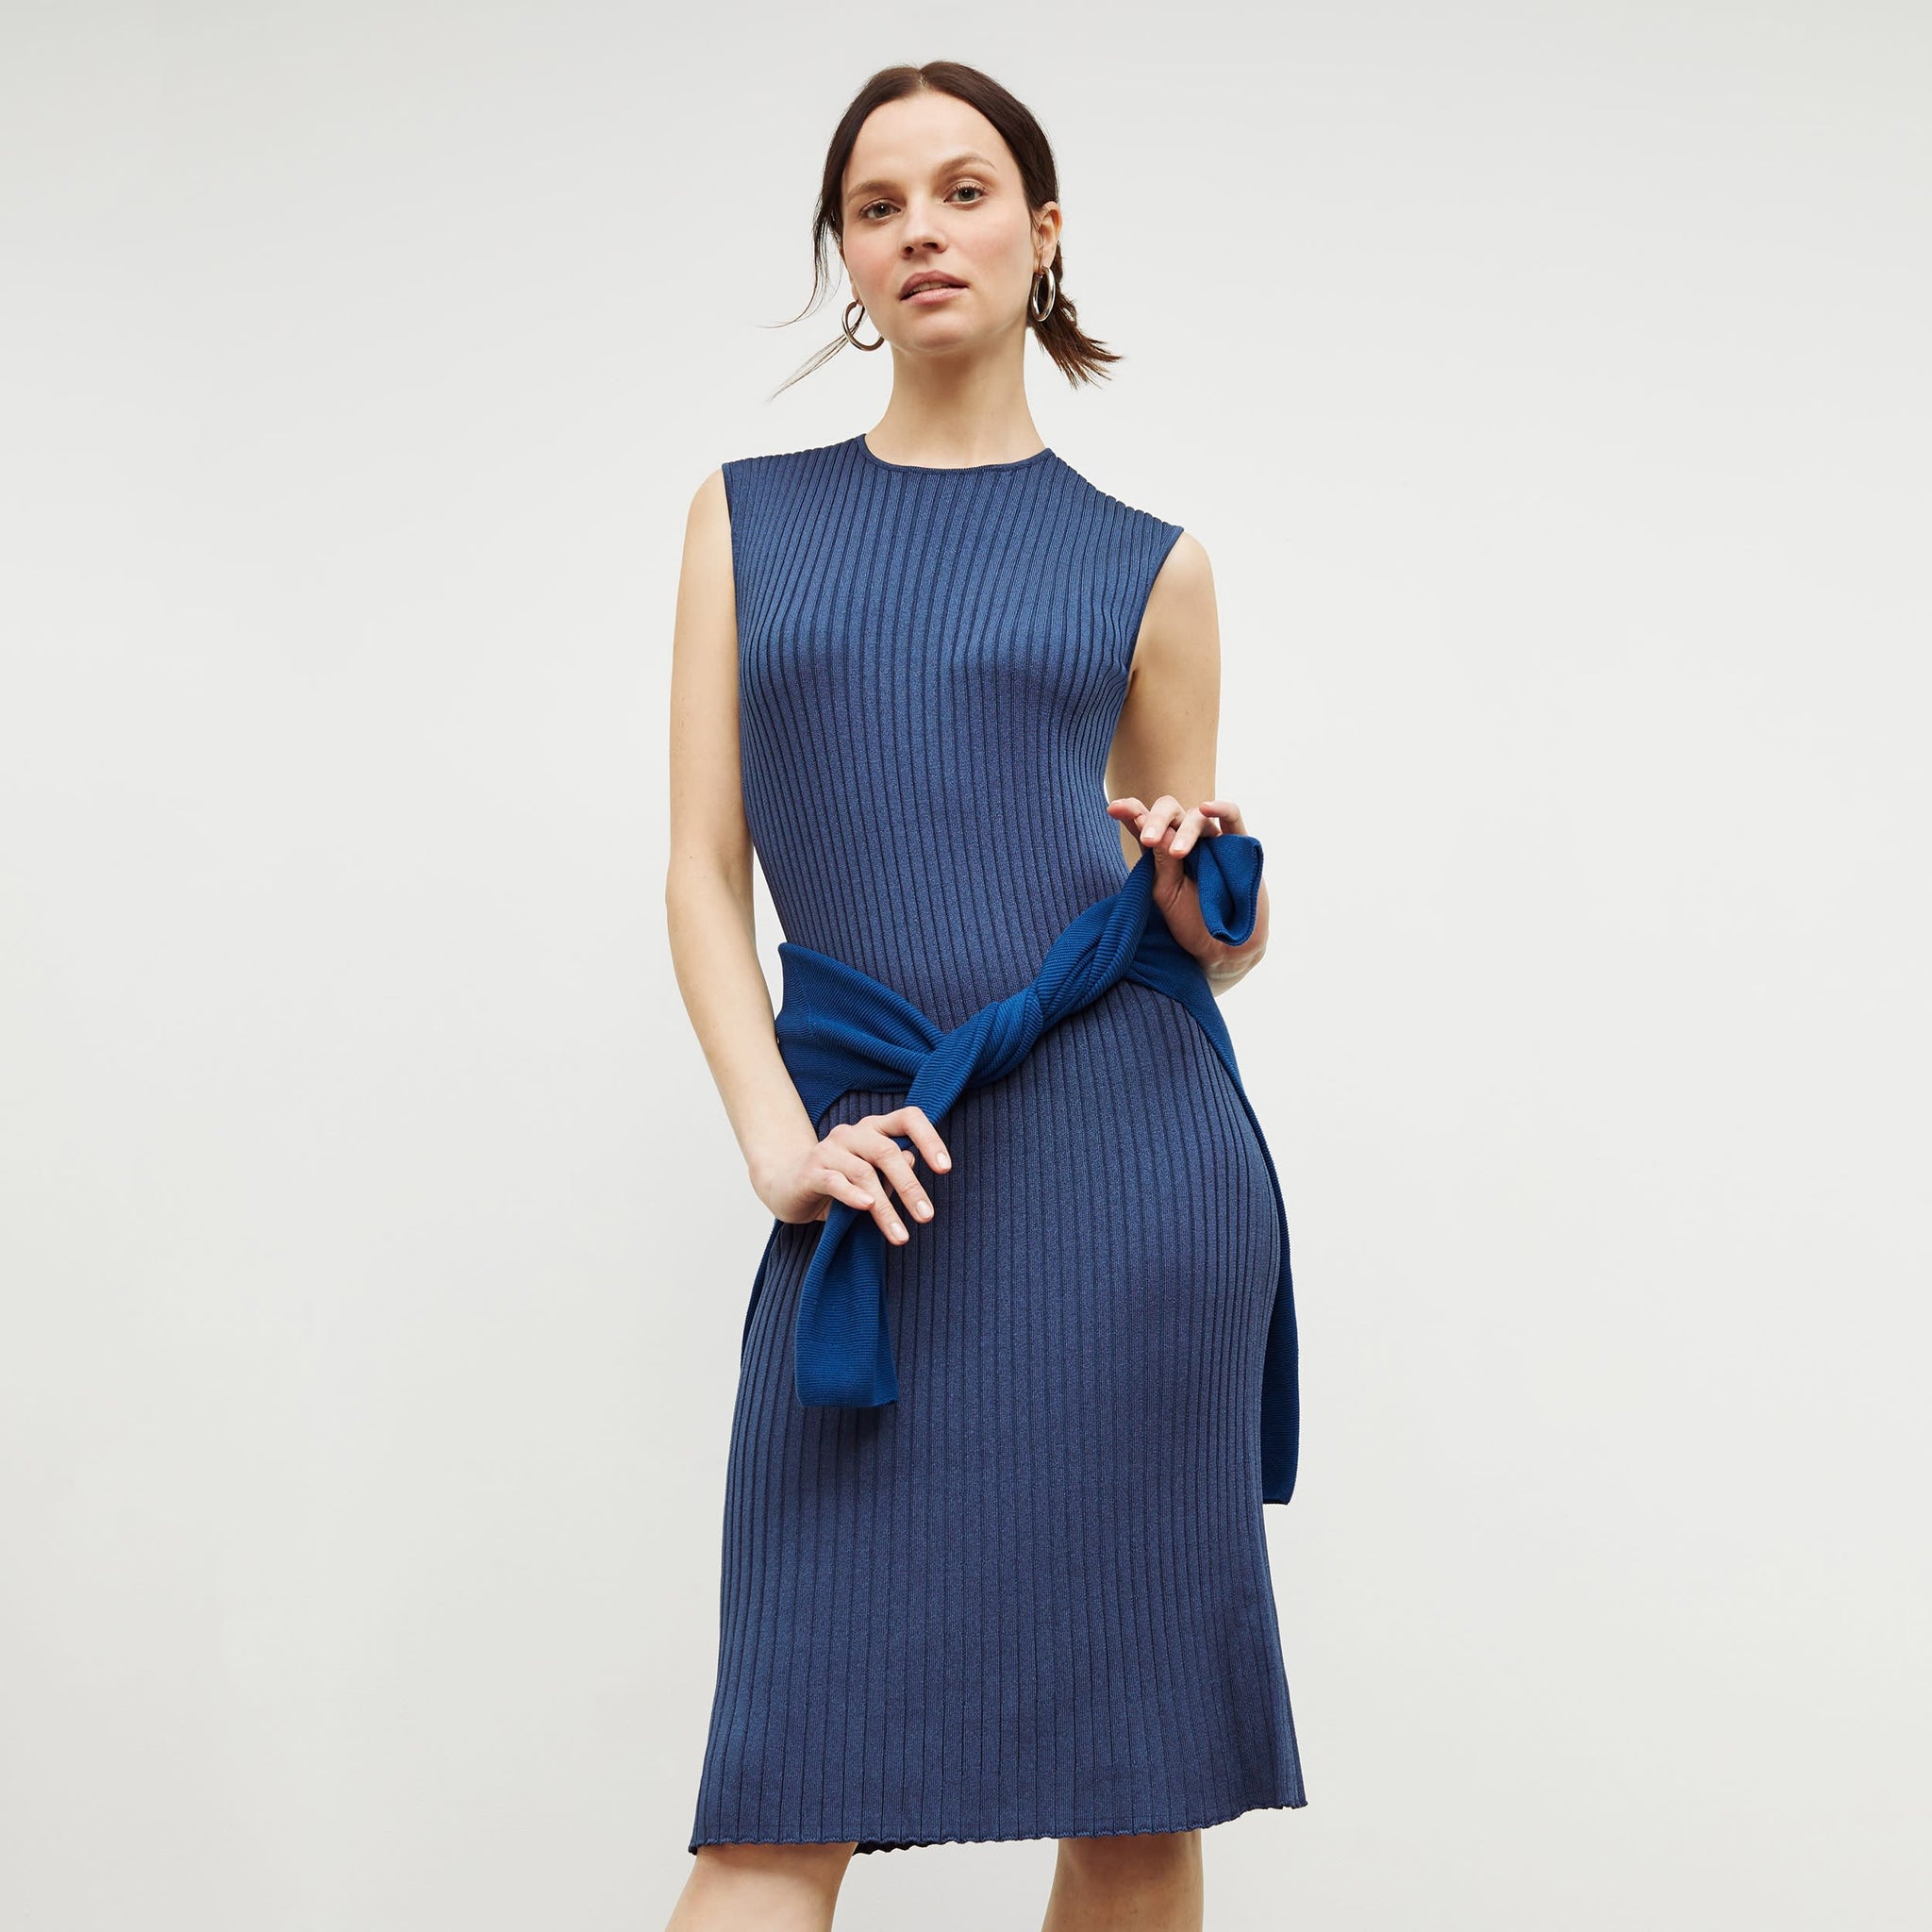 Front image of a woman standing wearing the dylan dress in adriatic blue